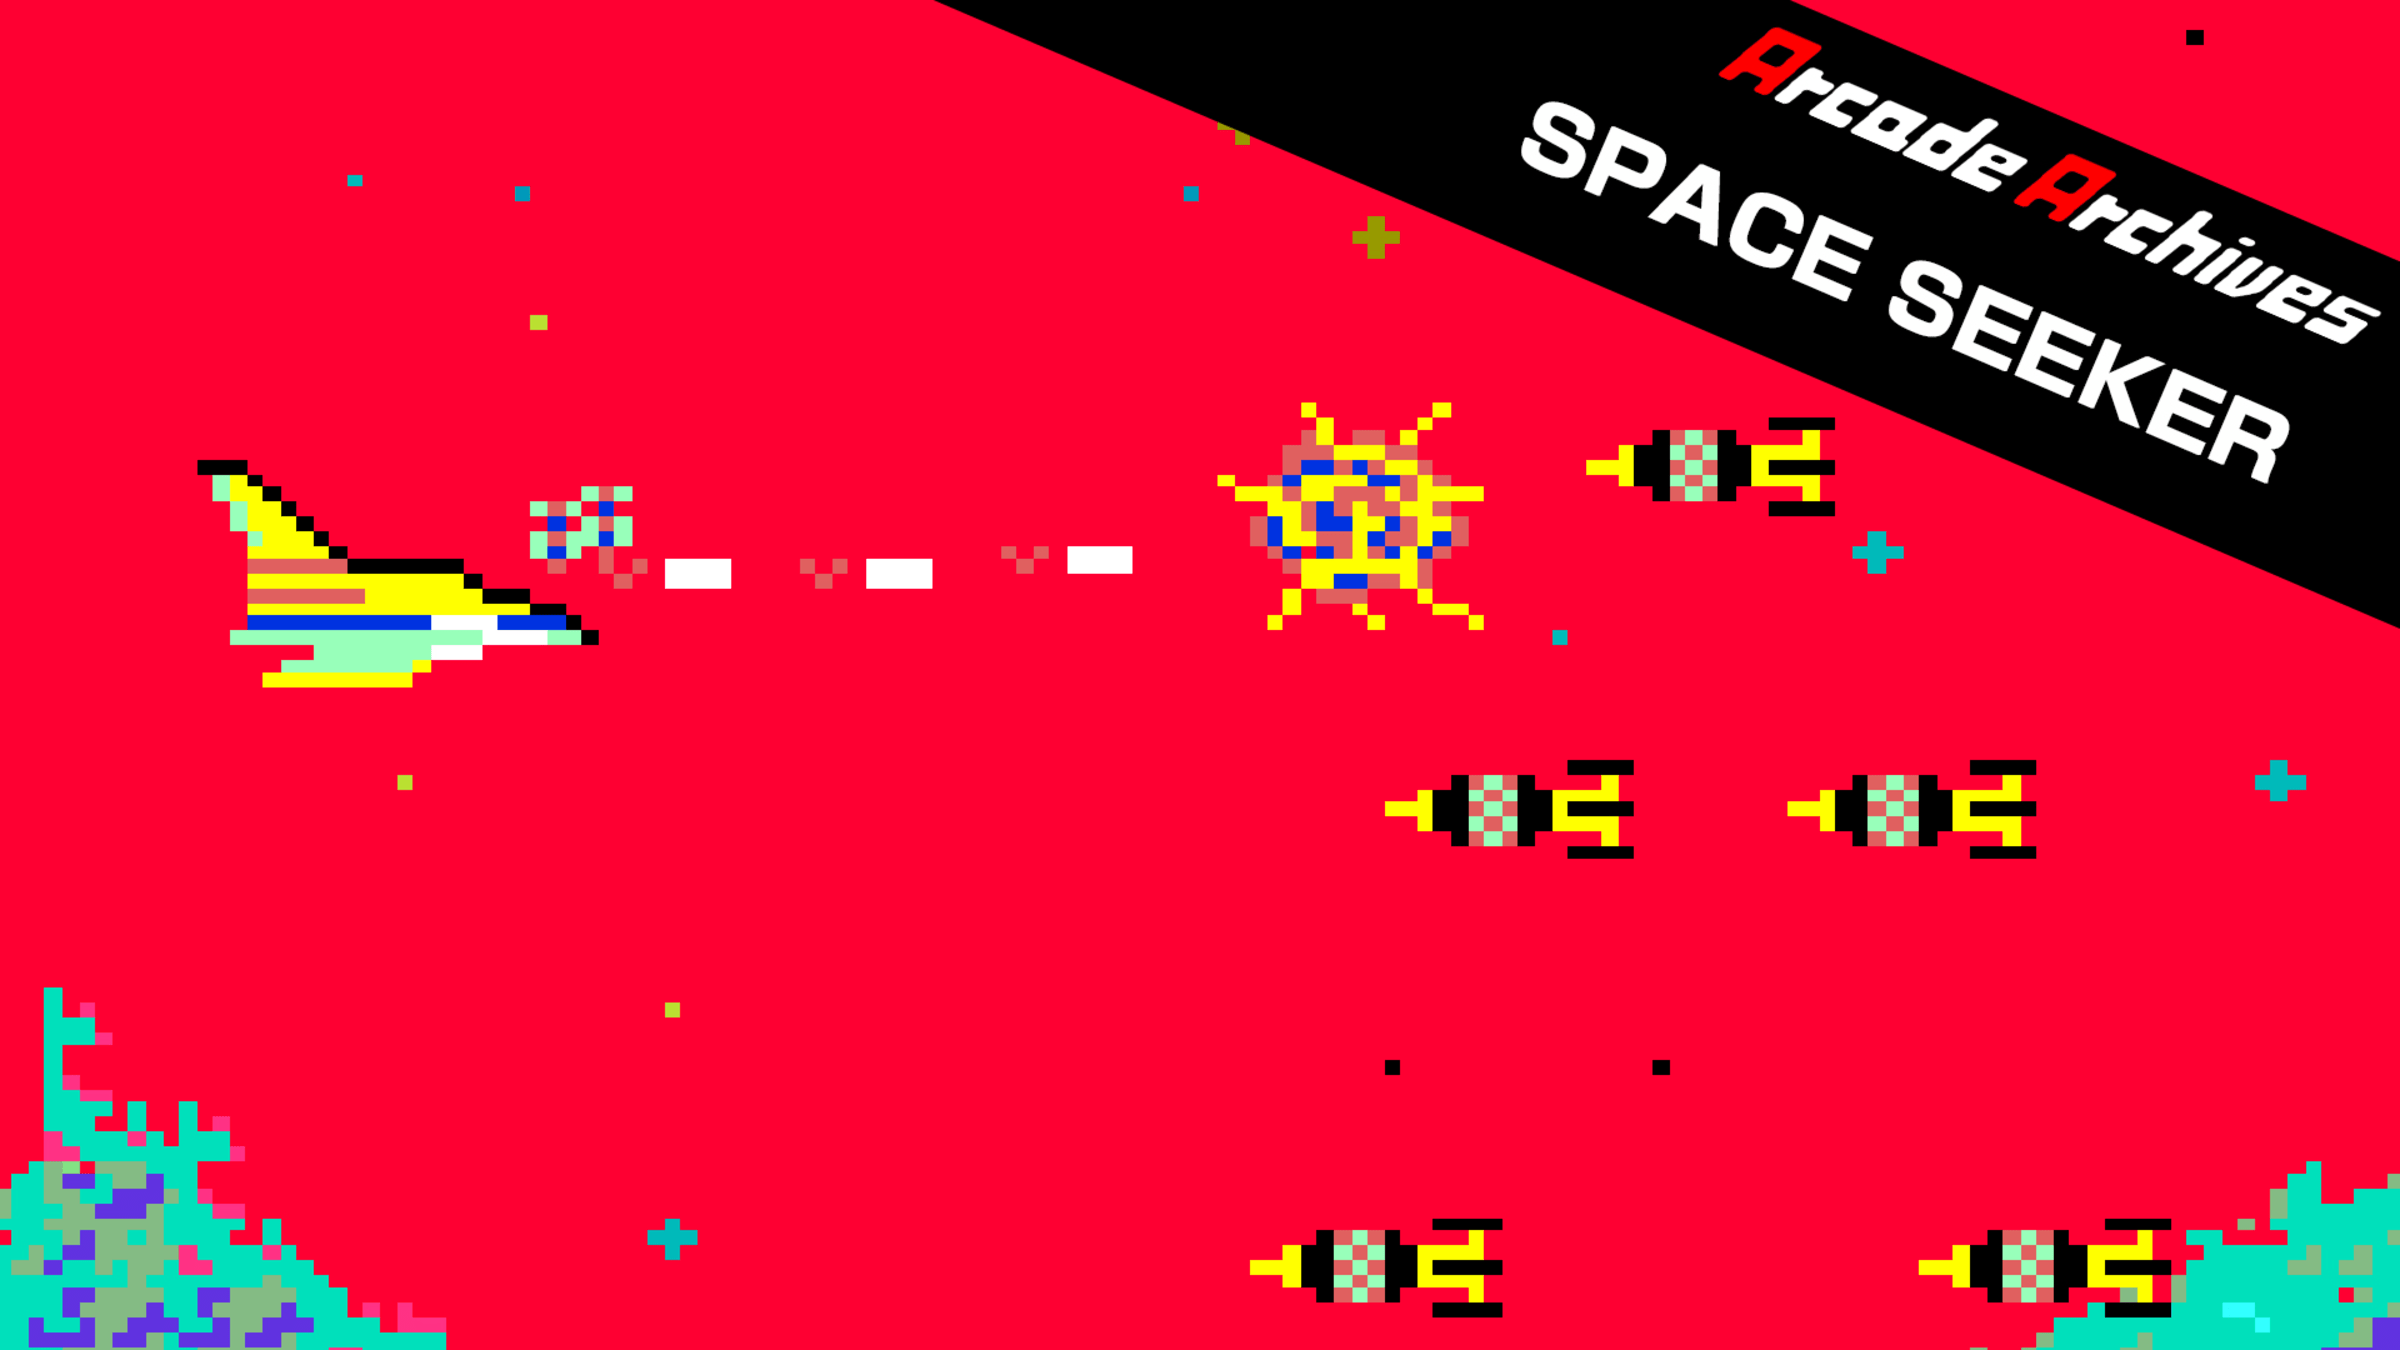 Arcade Archives SPACE SEEKER for Nintendo Switch